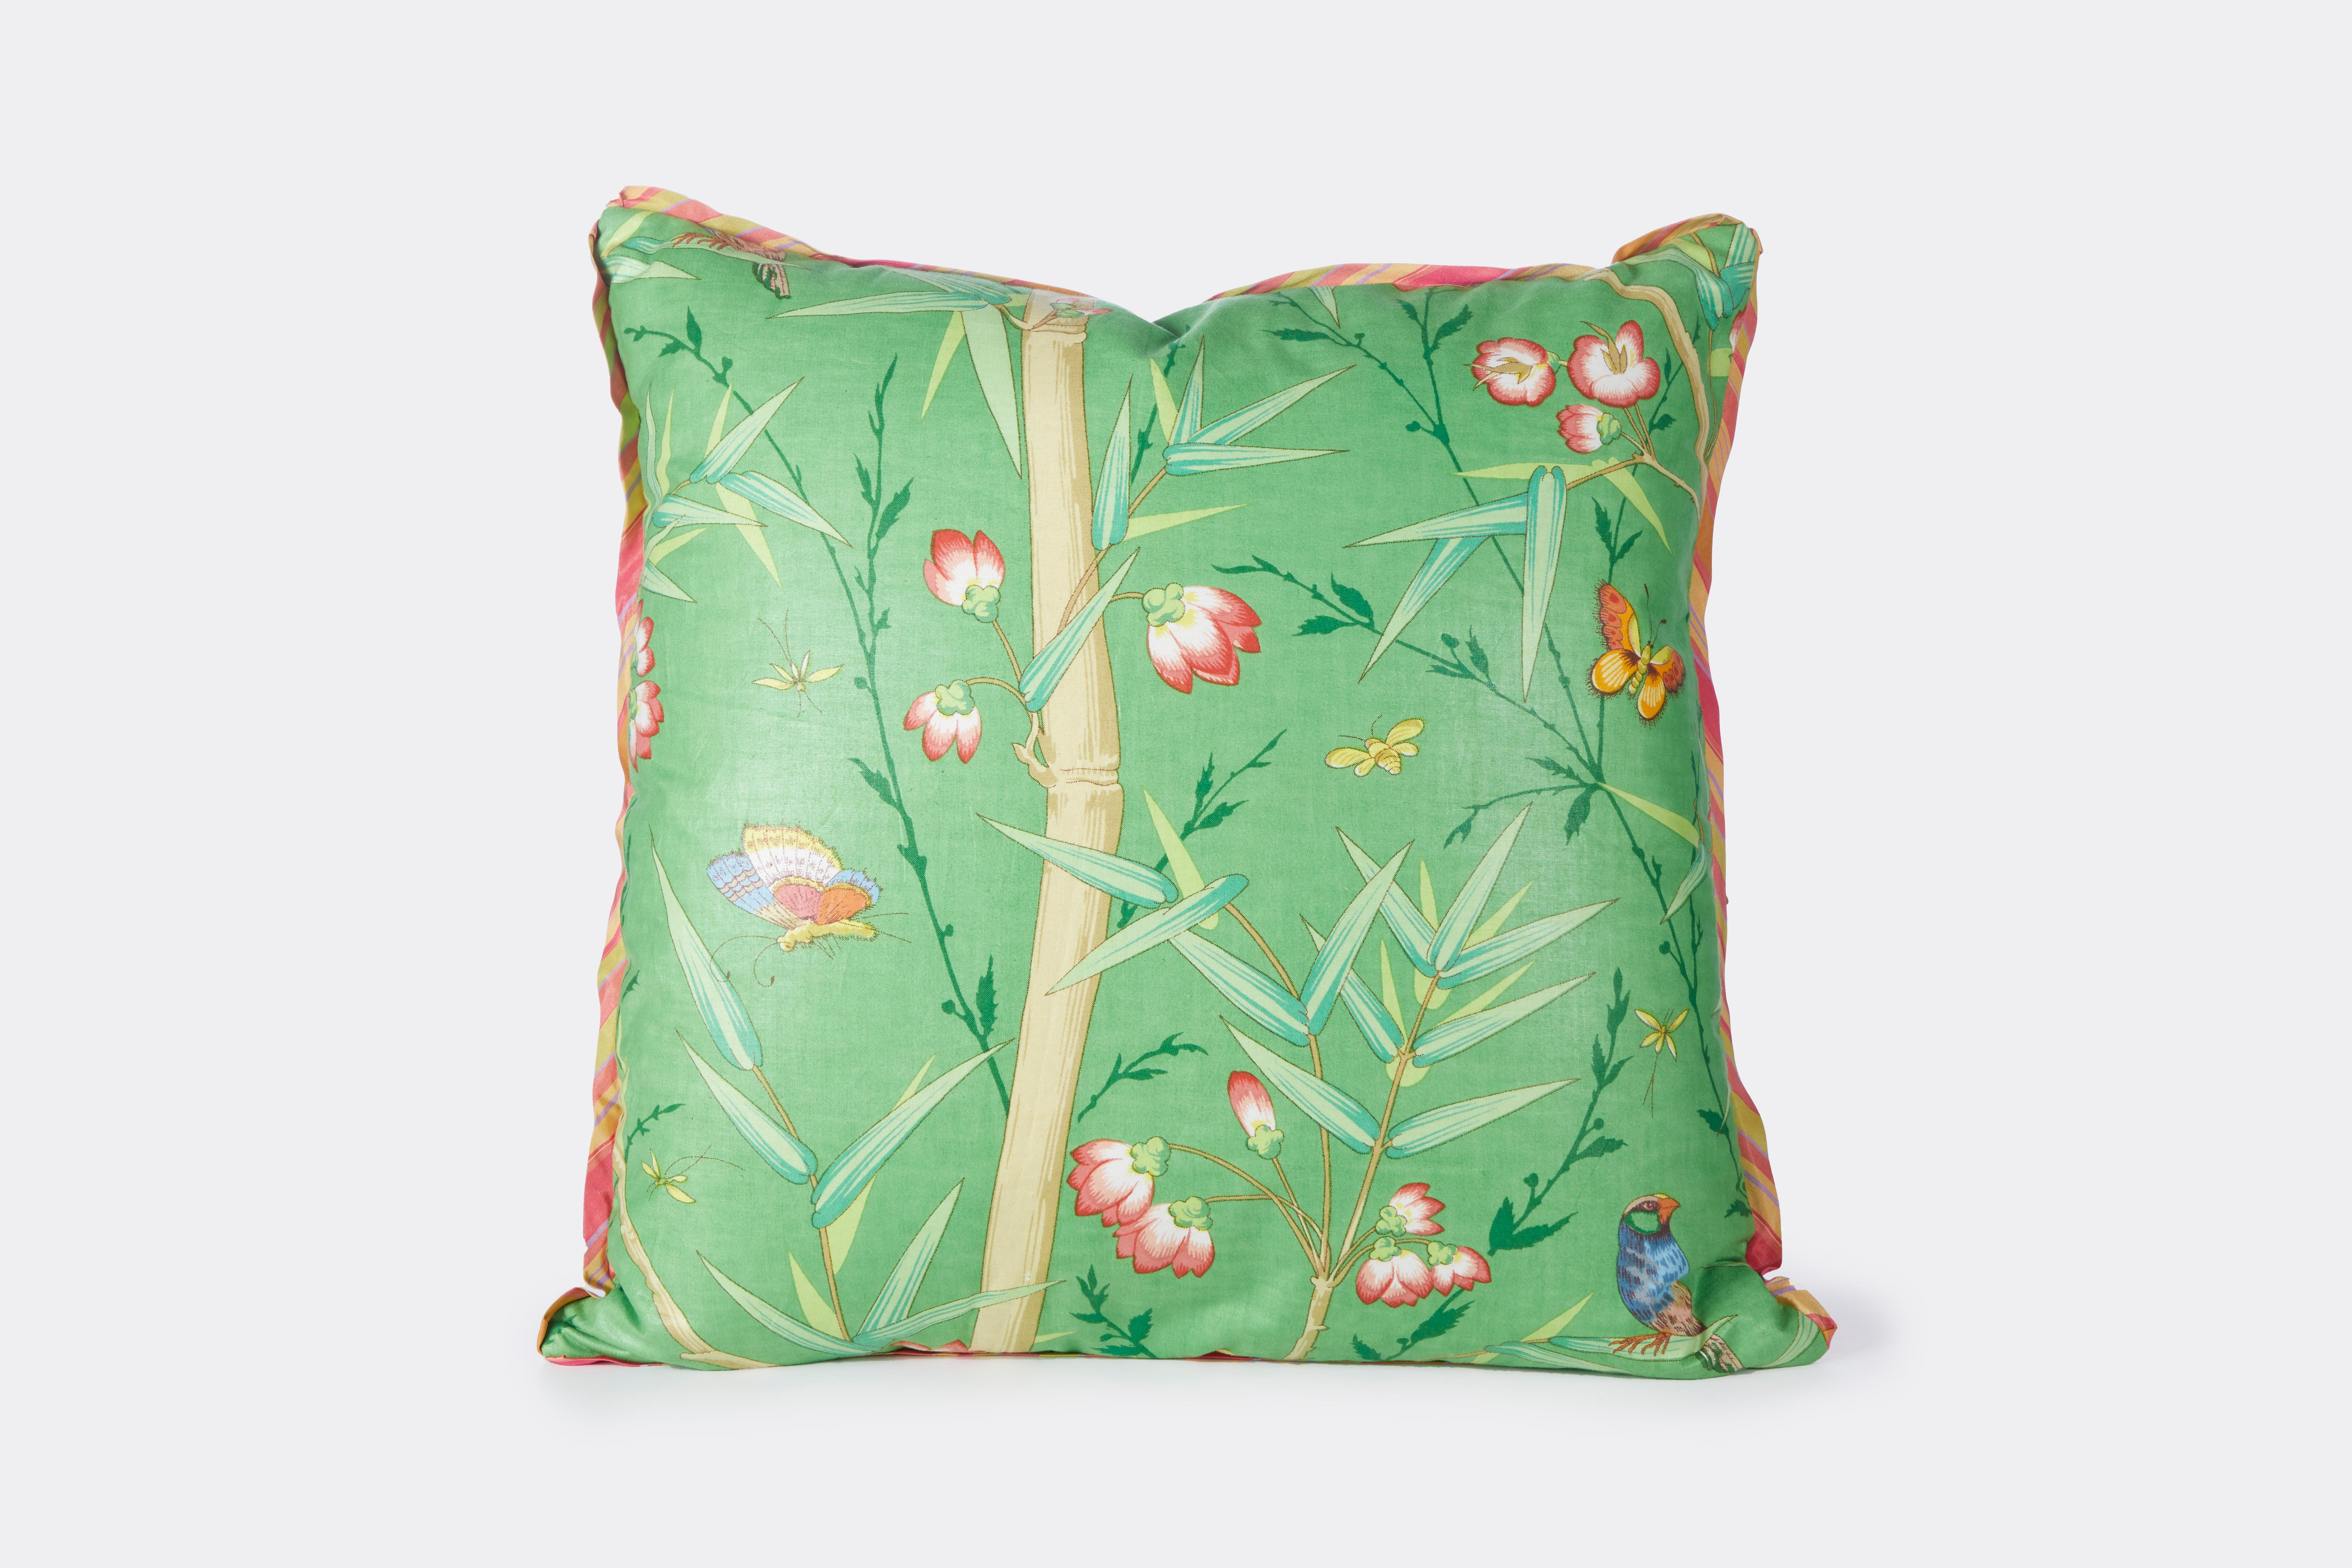 A new cushion made using vintage Schumacher Chinoiserie inspired chintz design with branches leaves and birds. Trimmed with bias silk stripe and backed with Rogers and Goffigon linen silk blend fabric.